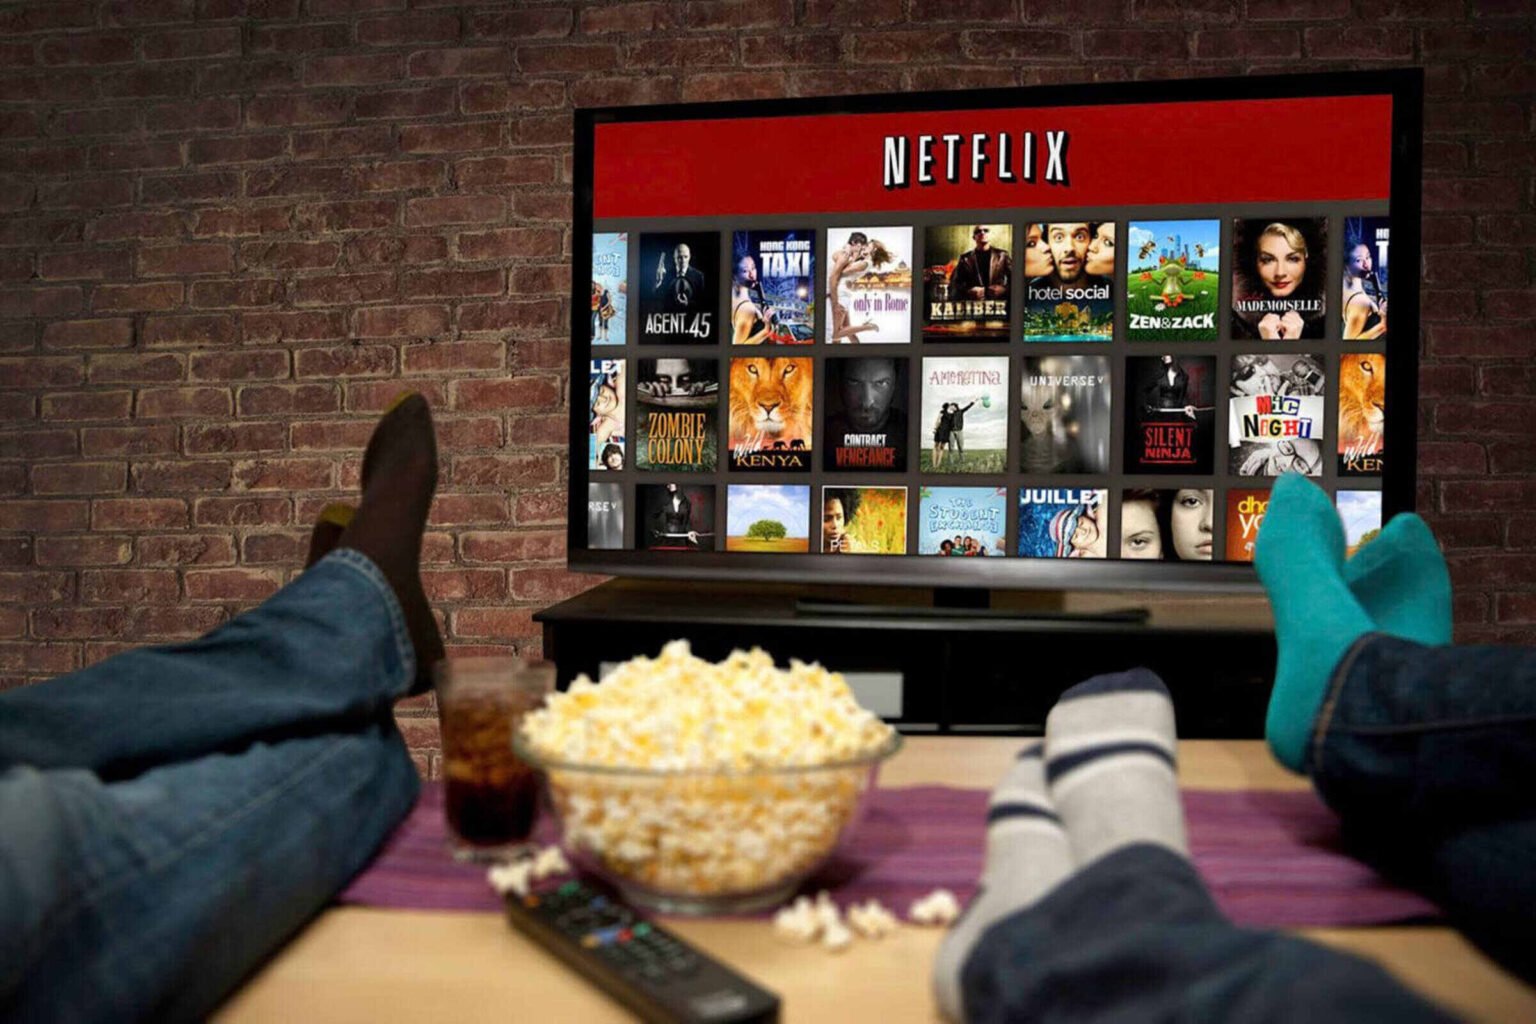 Who knew you could throw a Netflix party at home without leaving your bed? Grab your movie snacks and plan the best virtual movie binge with friends!